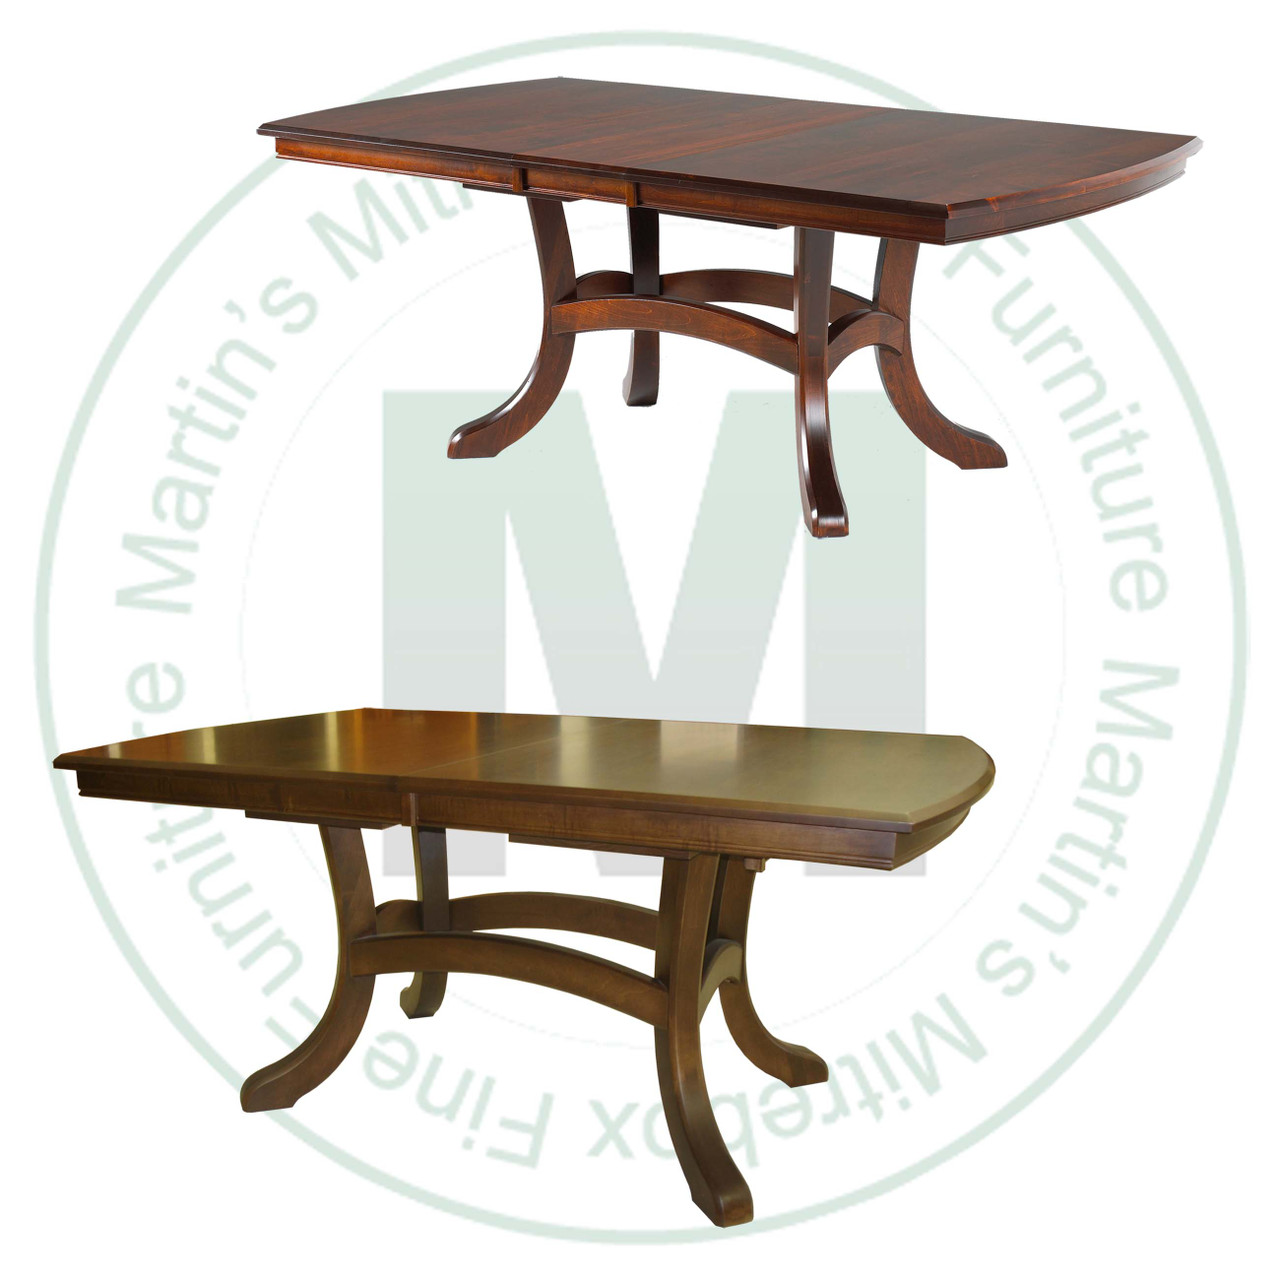 Maple Jordan Double Pedestal Table 48''D x 66''W x 30''H With 4 - 12'' Leaves. Table Has 1.25'' Thick Top